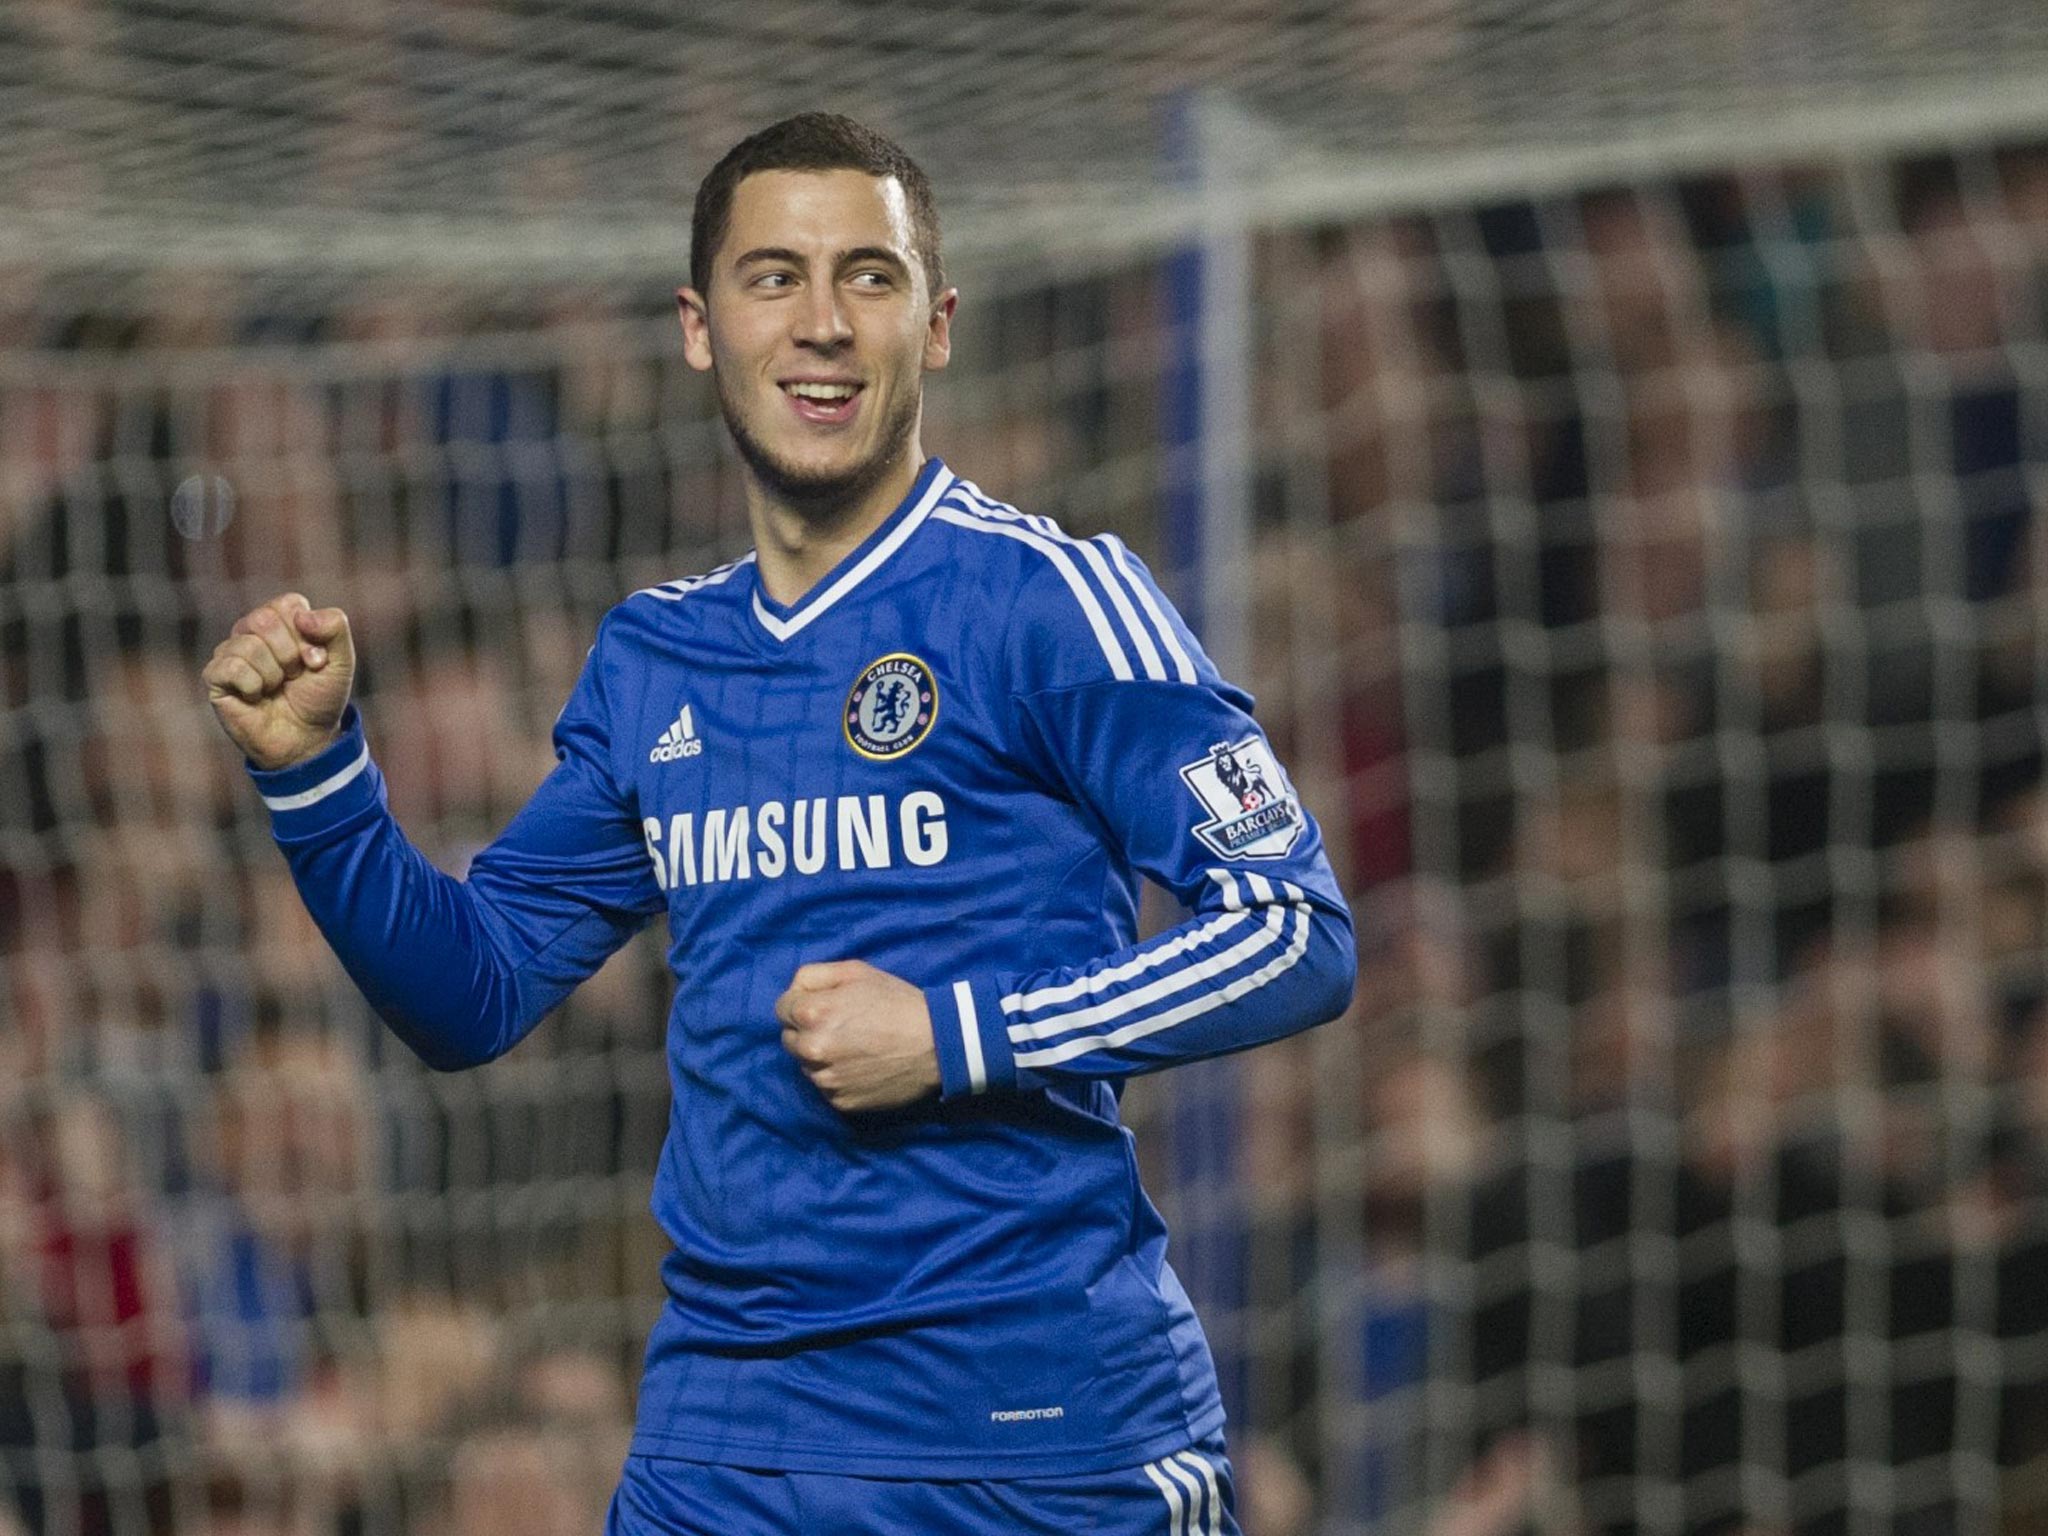 Eden Hazard, no doubt seeing the example made of Mata, knuckled down and started tracking back